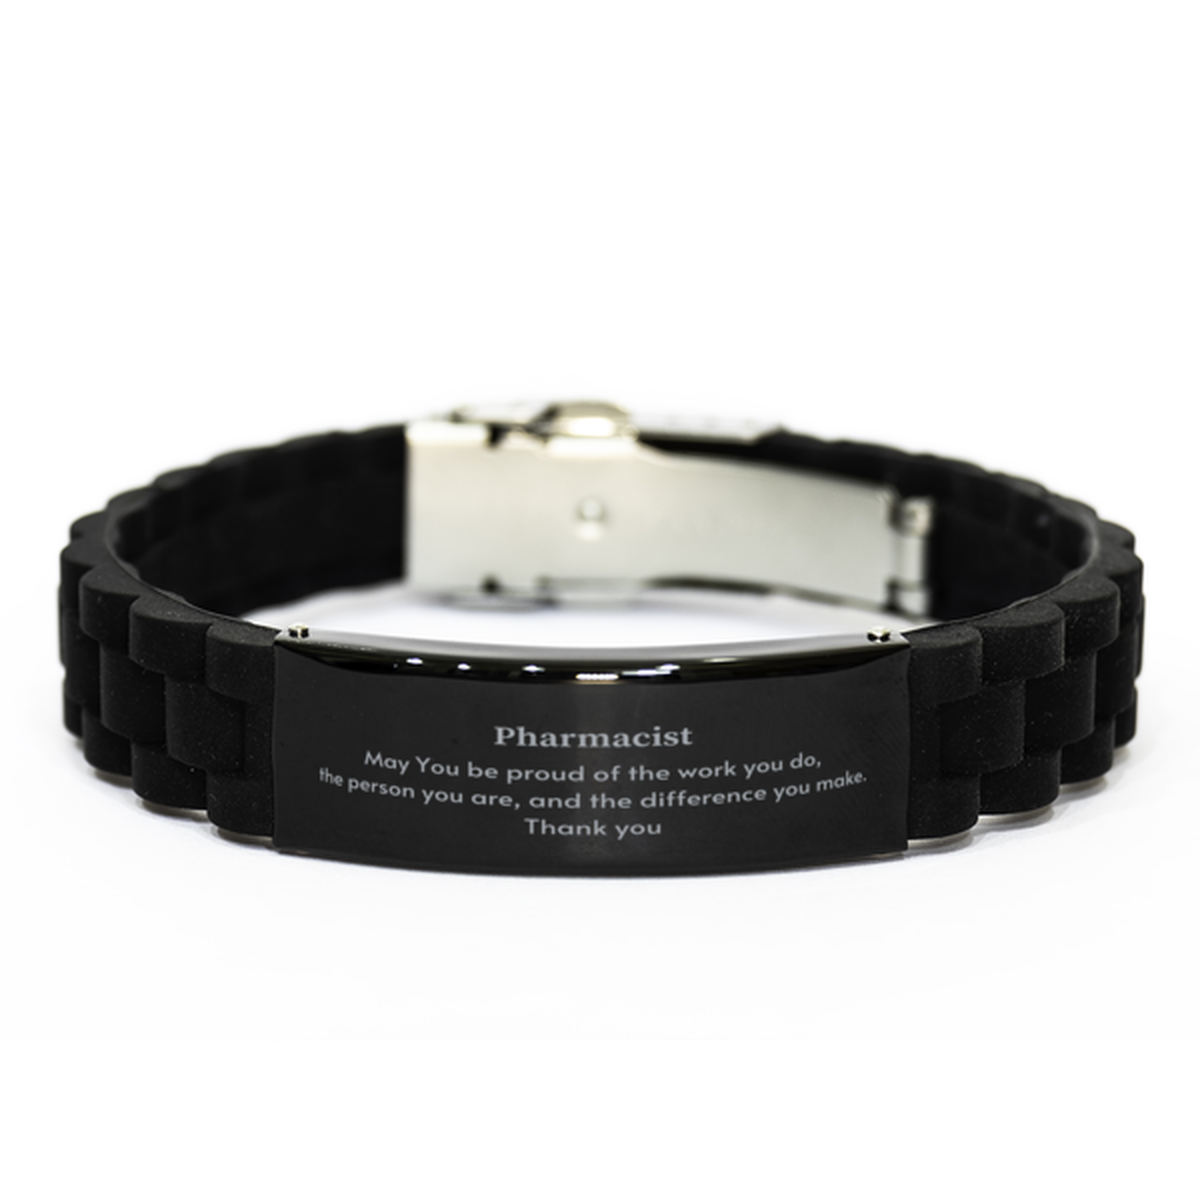 Heartwarming Black Glidelock Clasp Bracelet Retirement Coworkers Gifts for Pharmacist, Pharmacist May You be proud of the work you do, the person you are Gifts for Boss Men Women Friends